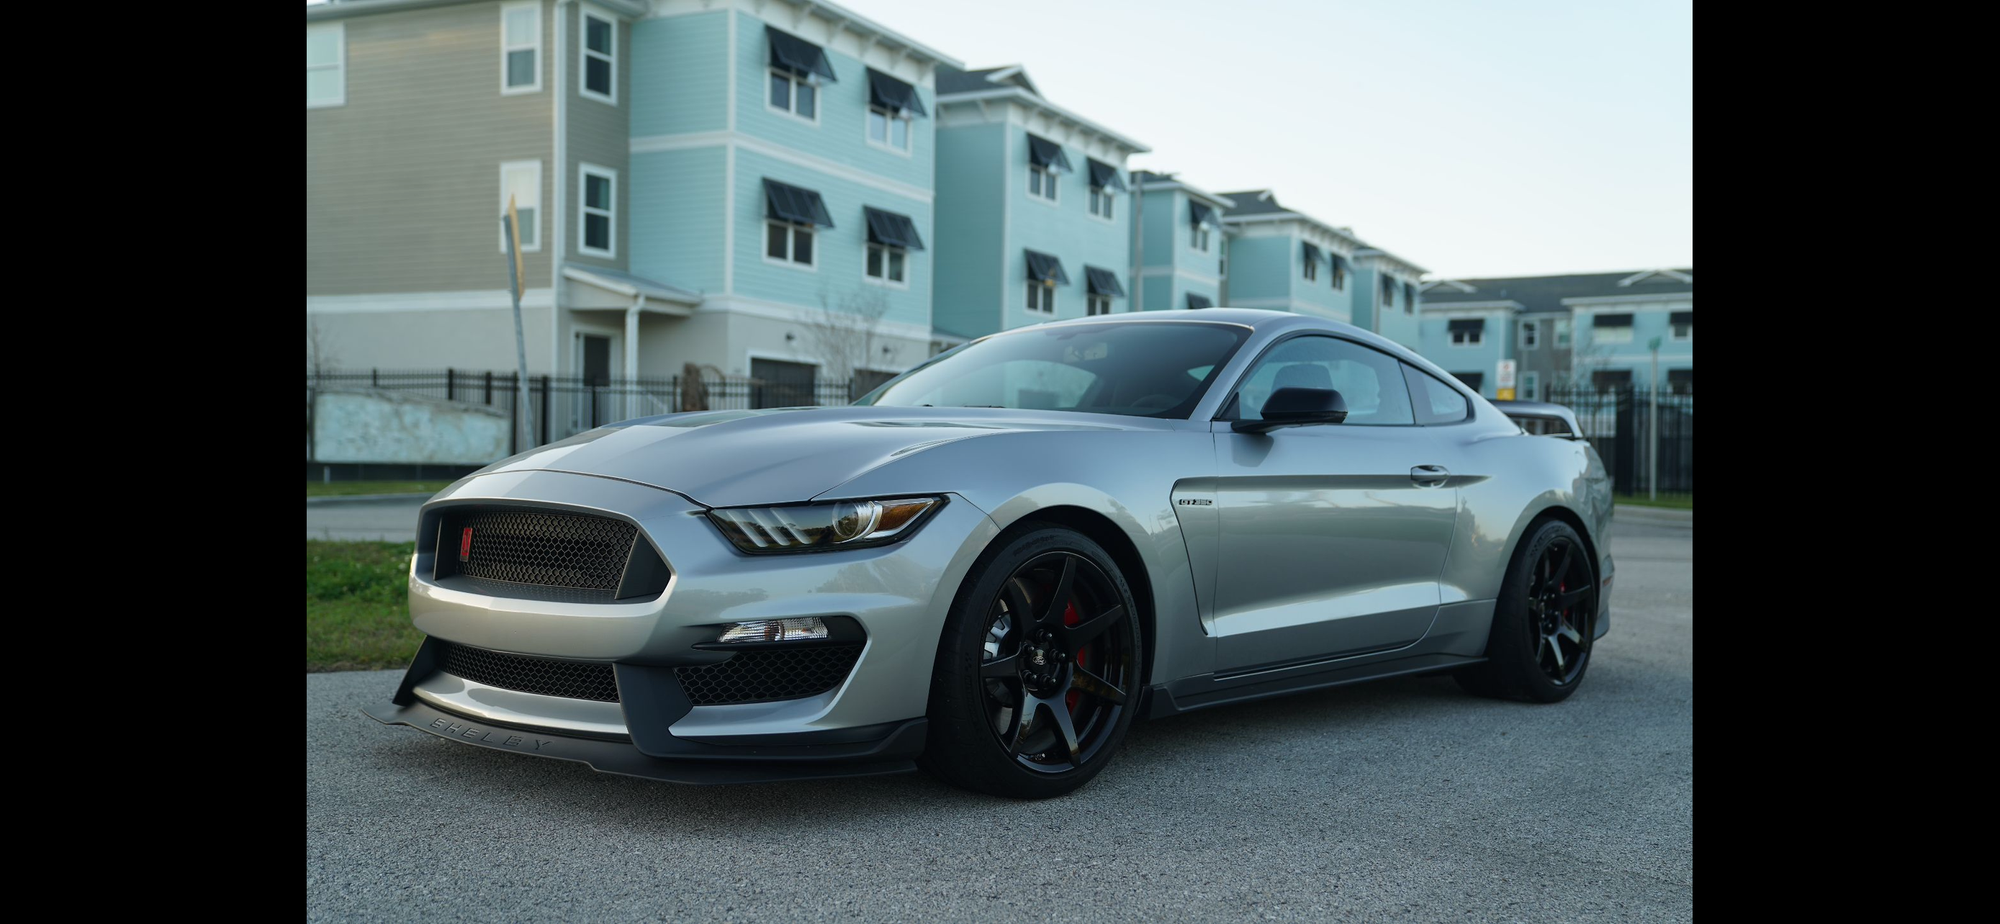 2020 Ford Shelby GT350 - 2020 GT350R - Iconic Silver - 4300 miles - Used - VIN 1fa6p8jz9l5551820 - 4,300 Miles - 8 cyl - 2WD - Manual - Coupe - Silver - St Petersburg, FL 33702, United States